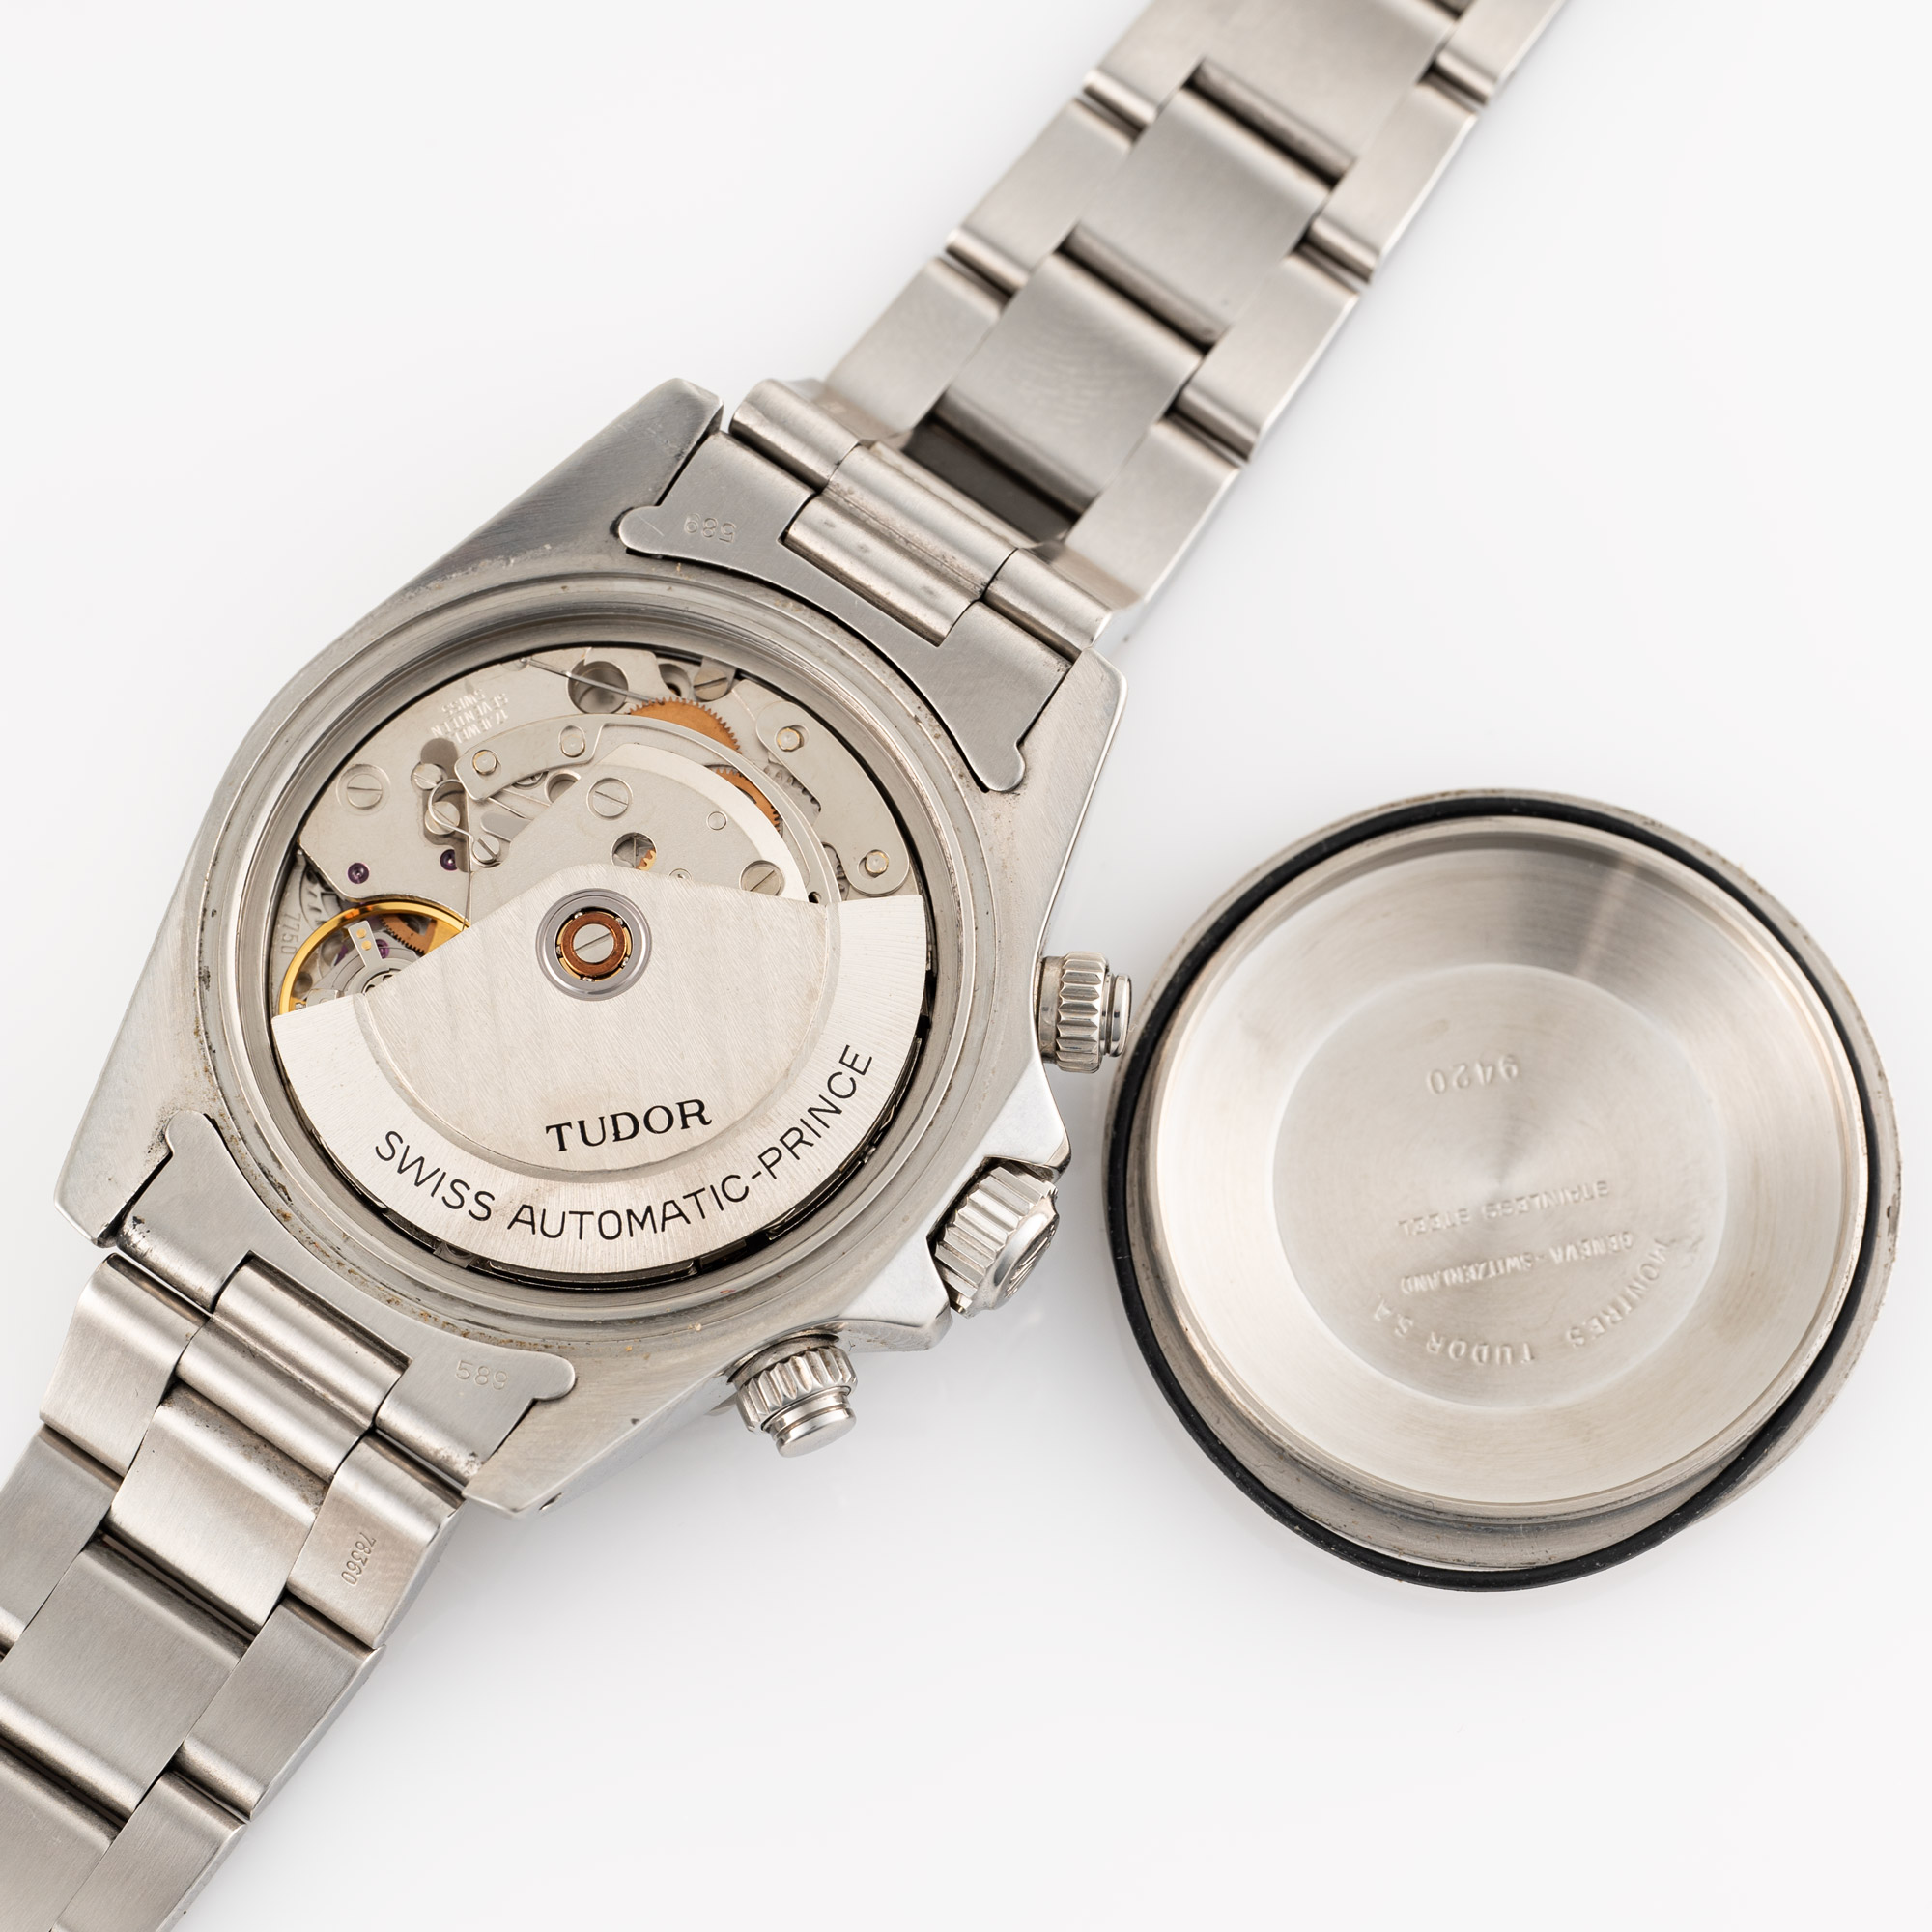 A GENTLEMAN'S SIZE STAINLESS STEEL ROLEX TUDOR OYSTERDATE AUTOMATIC CHRONO TIME "BIG BLOCK" - Image 9 of 10